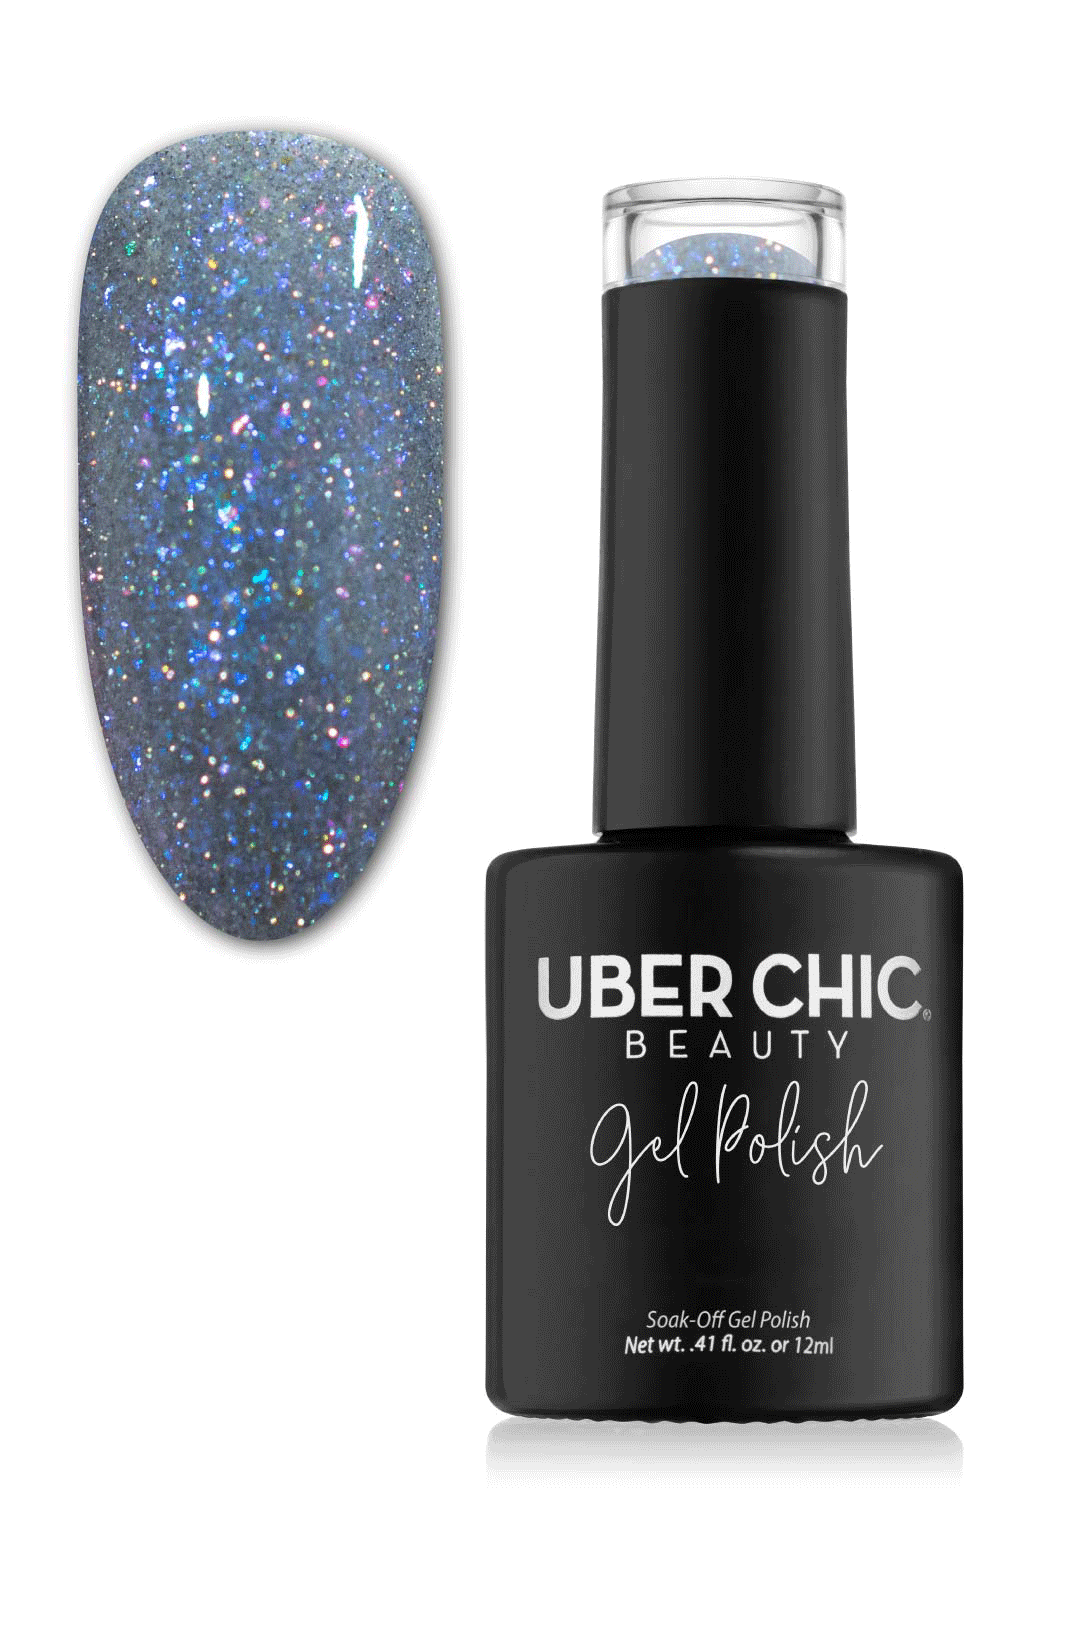 10 Best Colorbar Nail Polish Swatches - 2023 Update